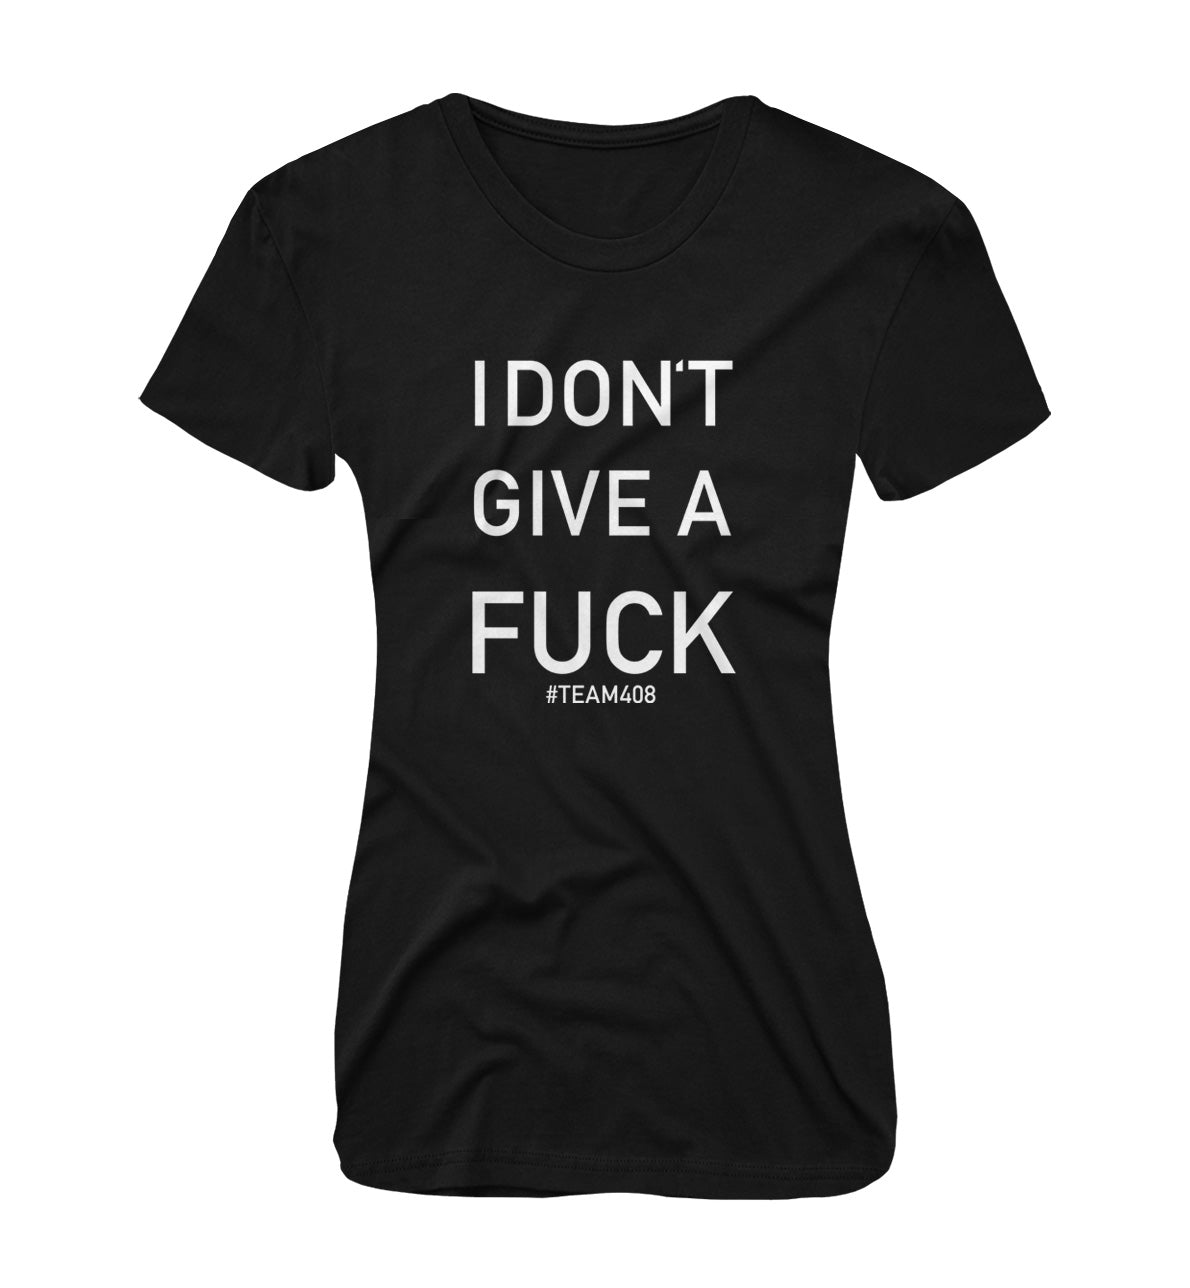 I Don't Give a Fuck Ladies Tee